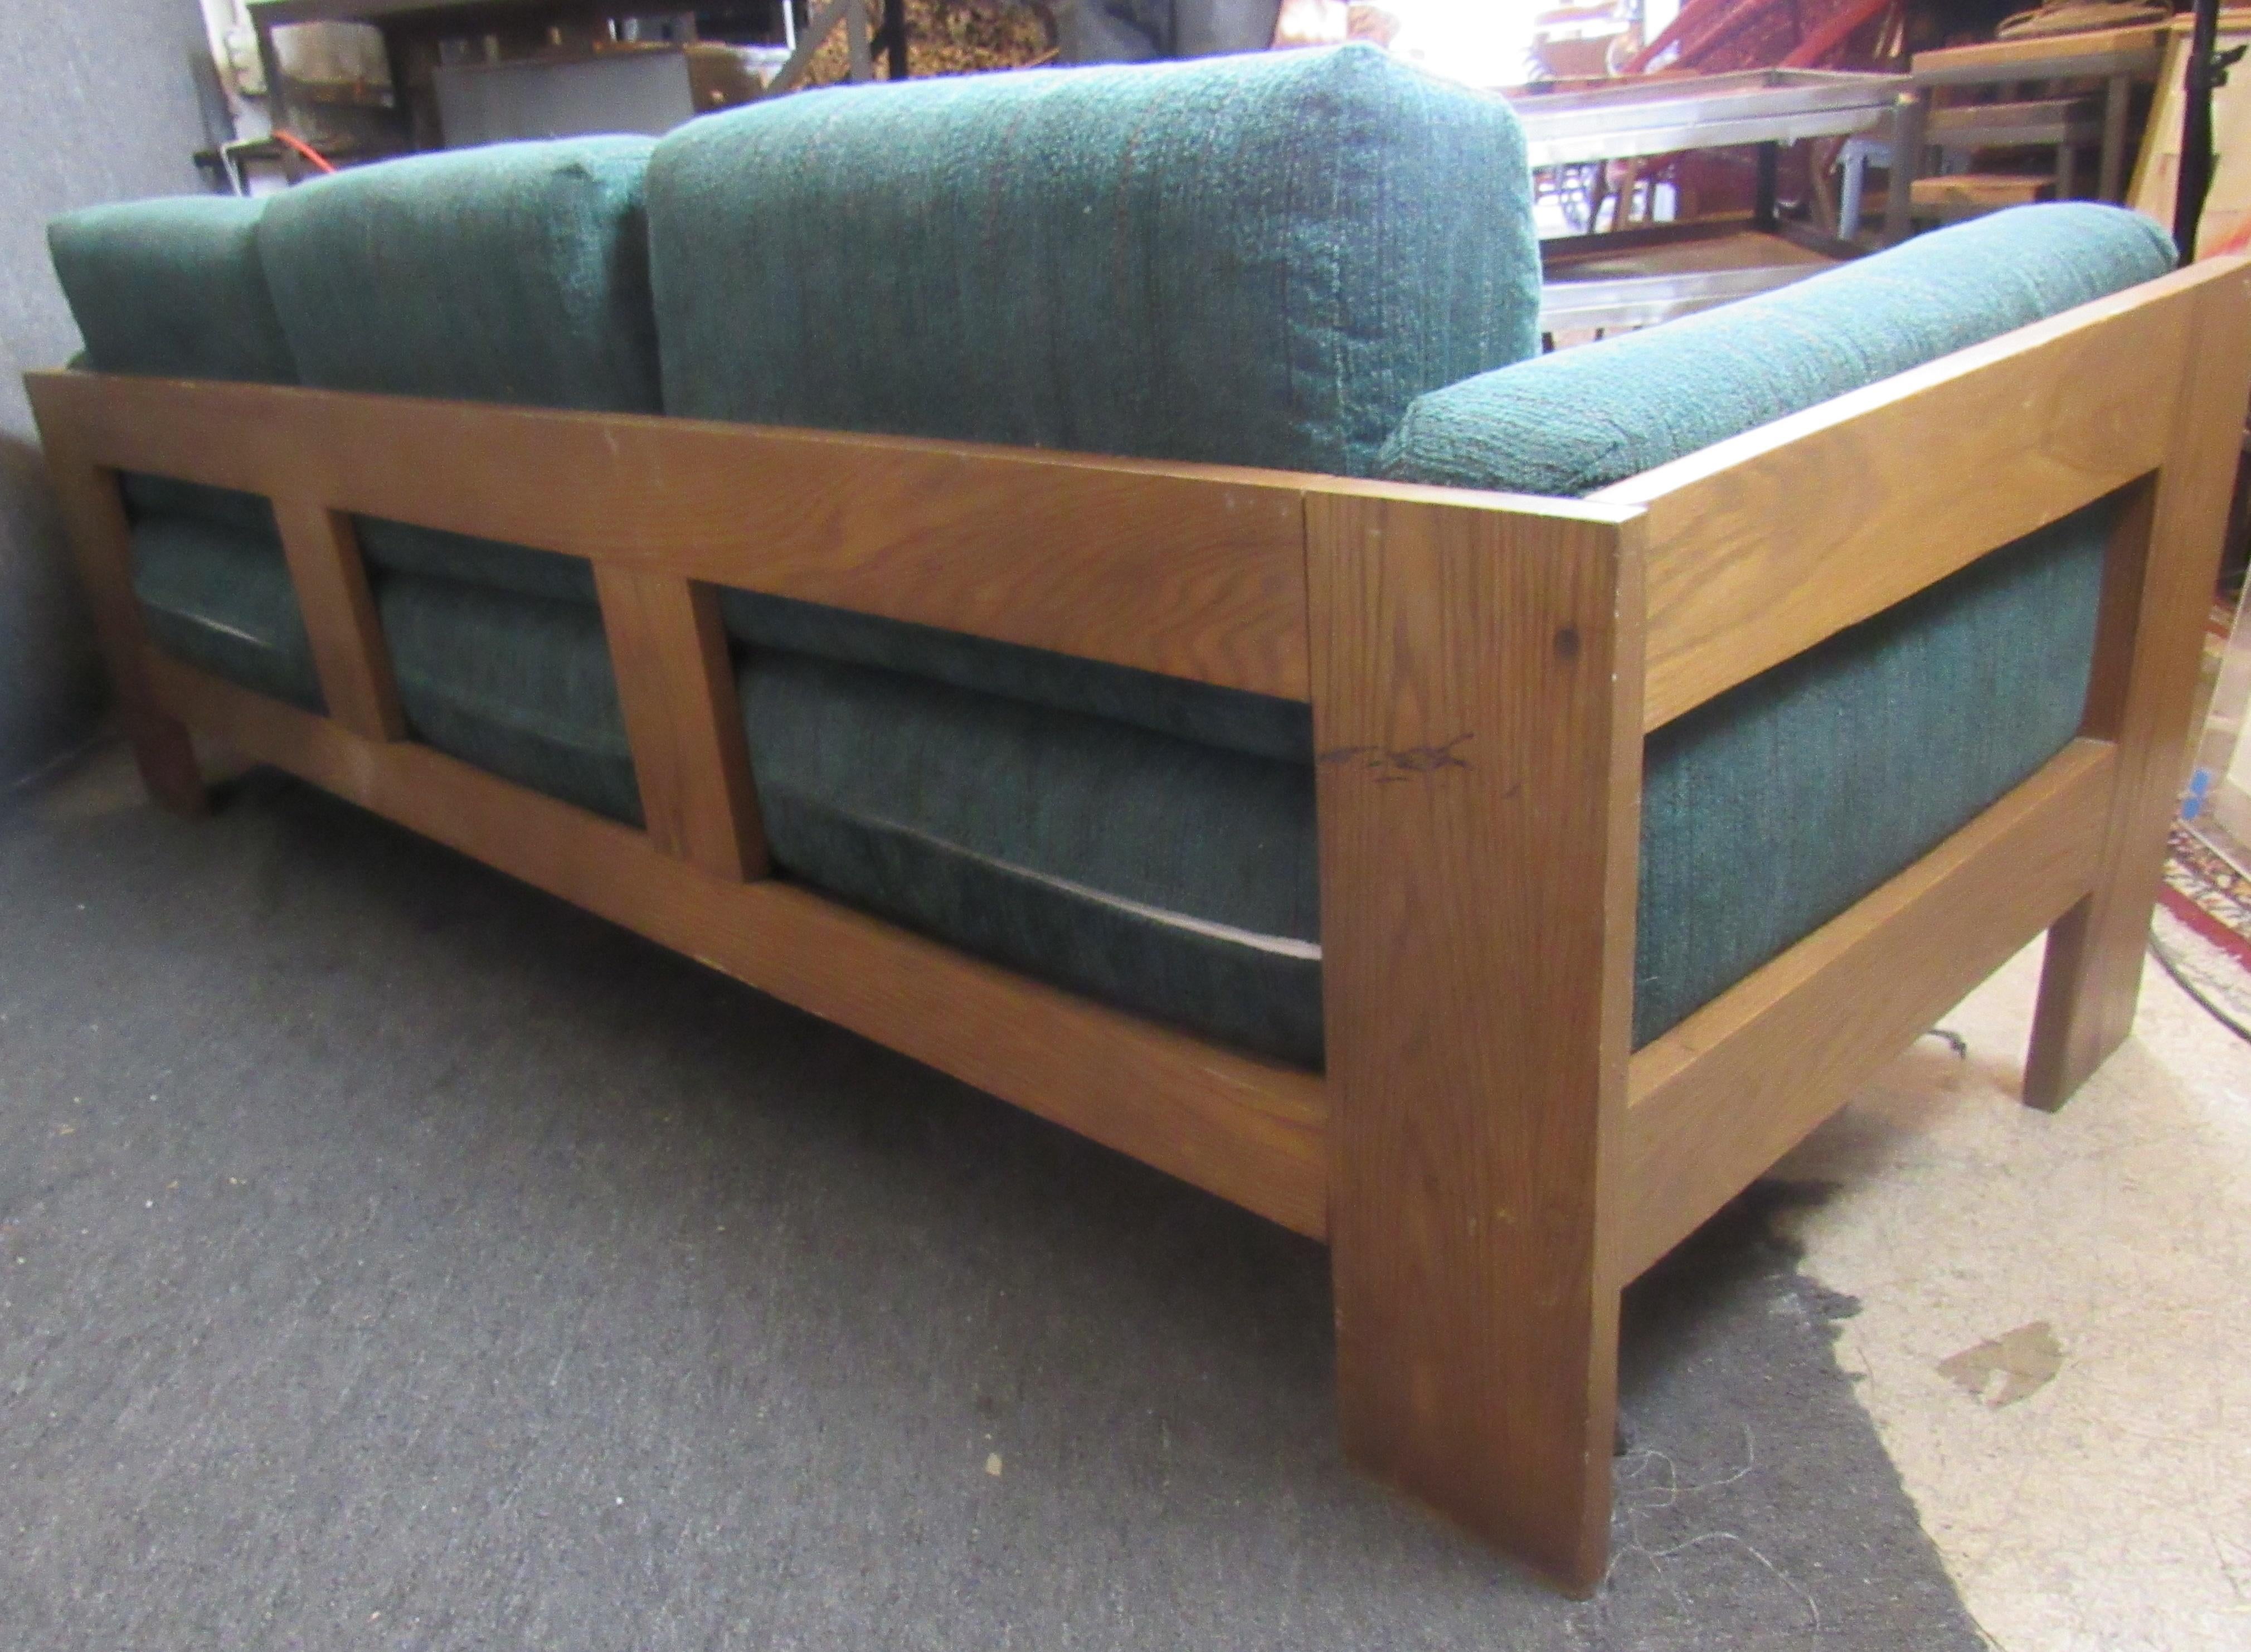 Mid Century Modern green couch with wooden frame. Three cushion width offering a large surface area for seating. The exposed wooden frame would pair beautifully with a mid century coffee table or light fixture. 
Please confirm location.